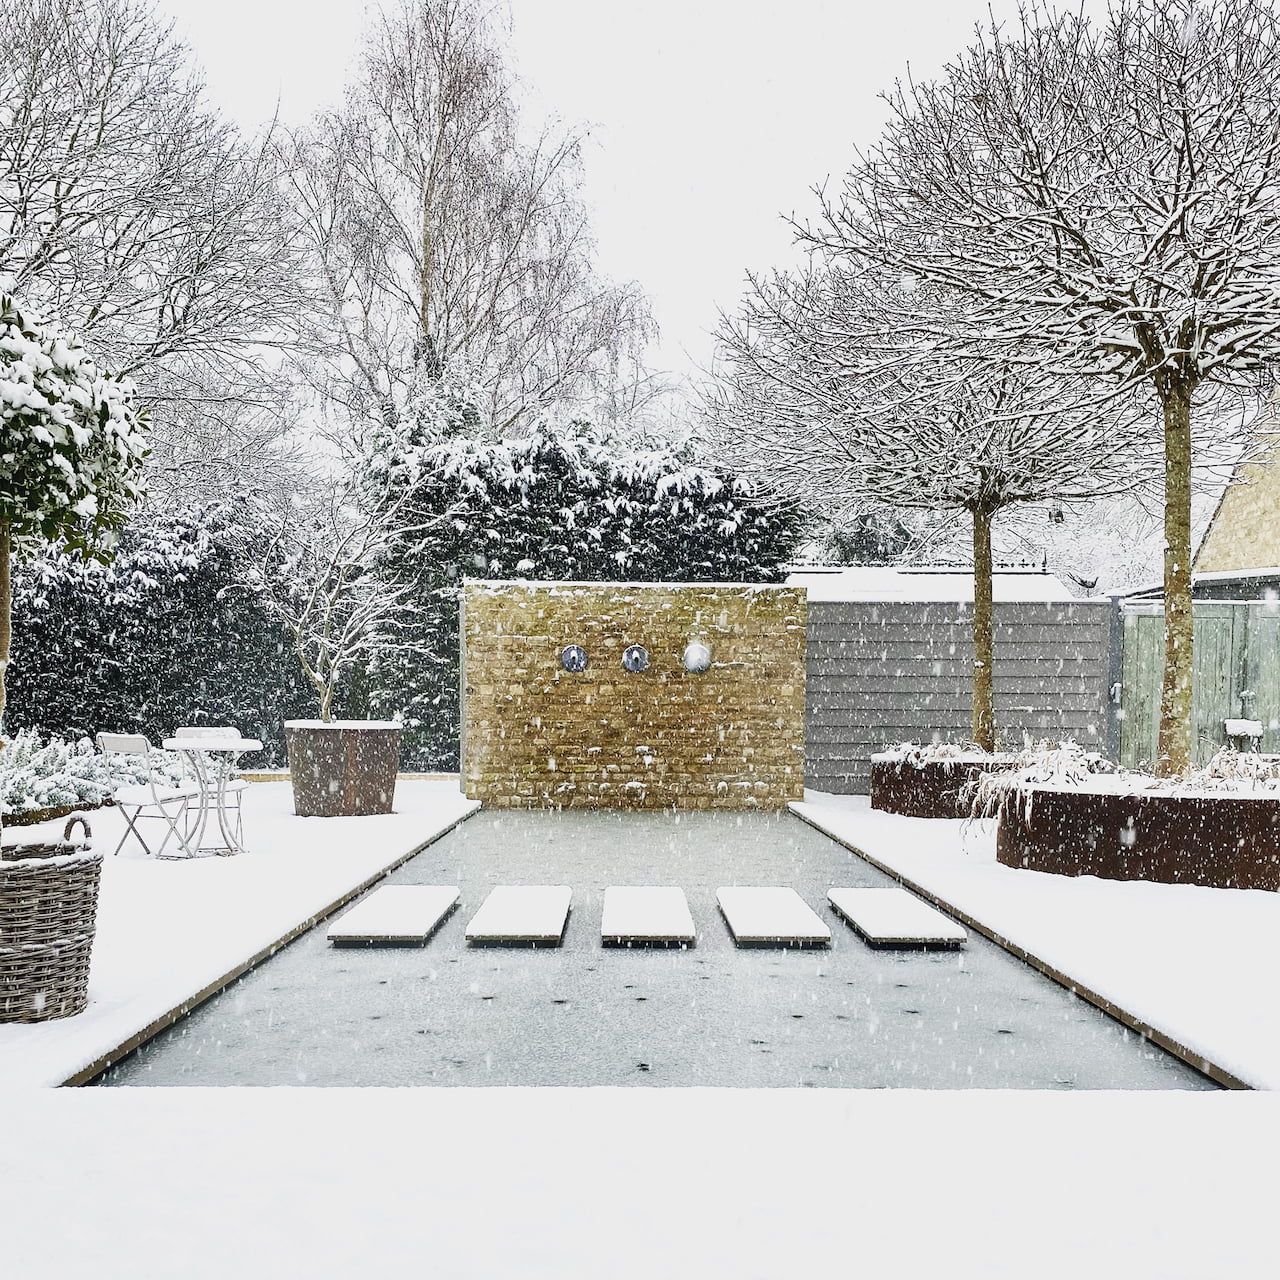 Our snowy courtyard by Jo Alderson Phillips. The Cotswold stone wall looks pretty against the white backdrop & the stepping stones really stand out in the pool